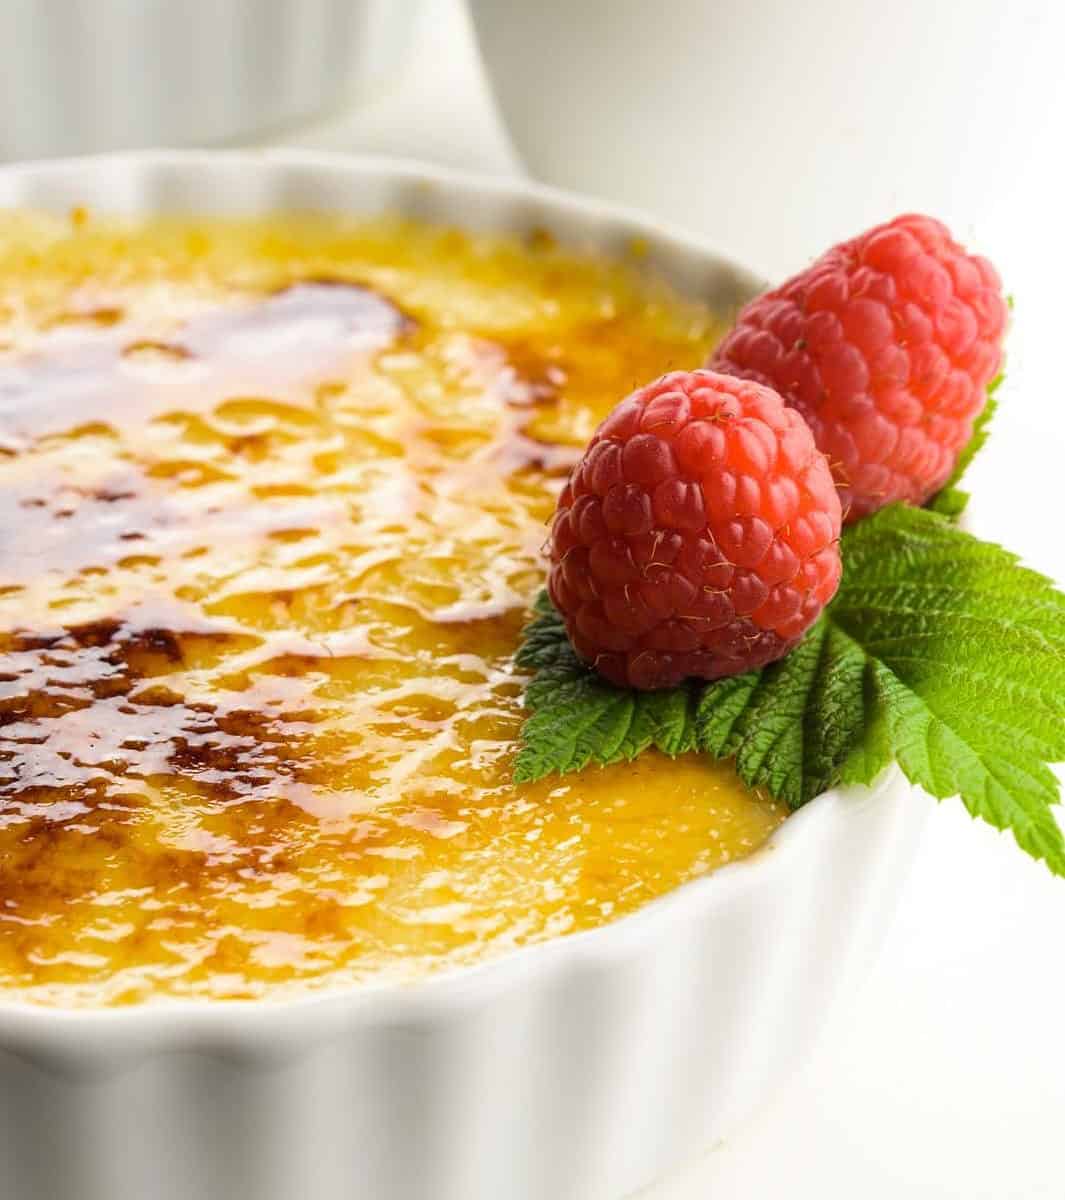  A vegan twist on a classic French dessert, Creme Brulee that will knock your socks off!